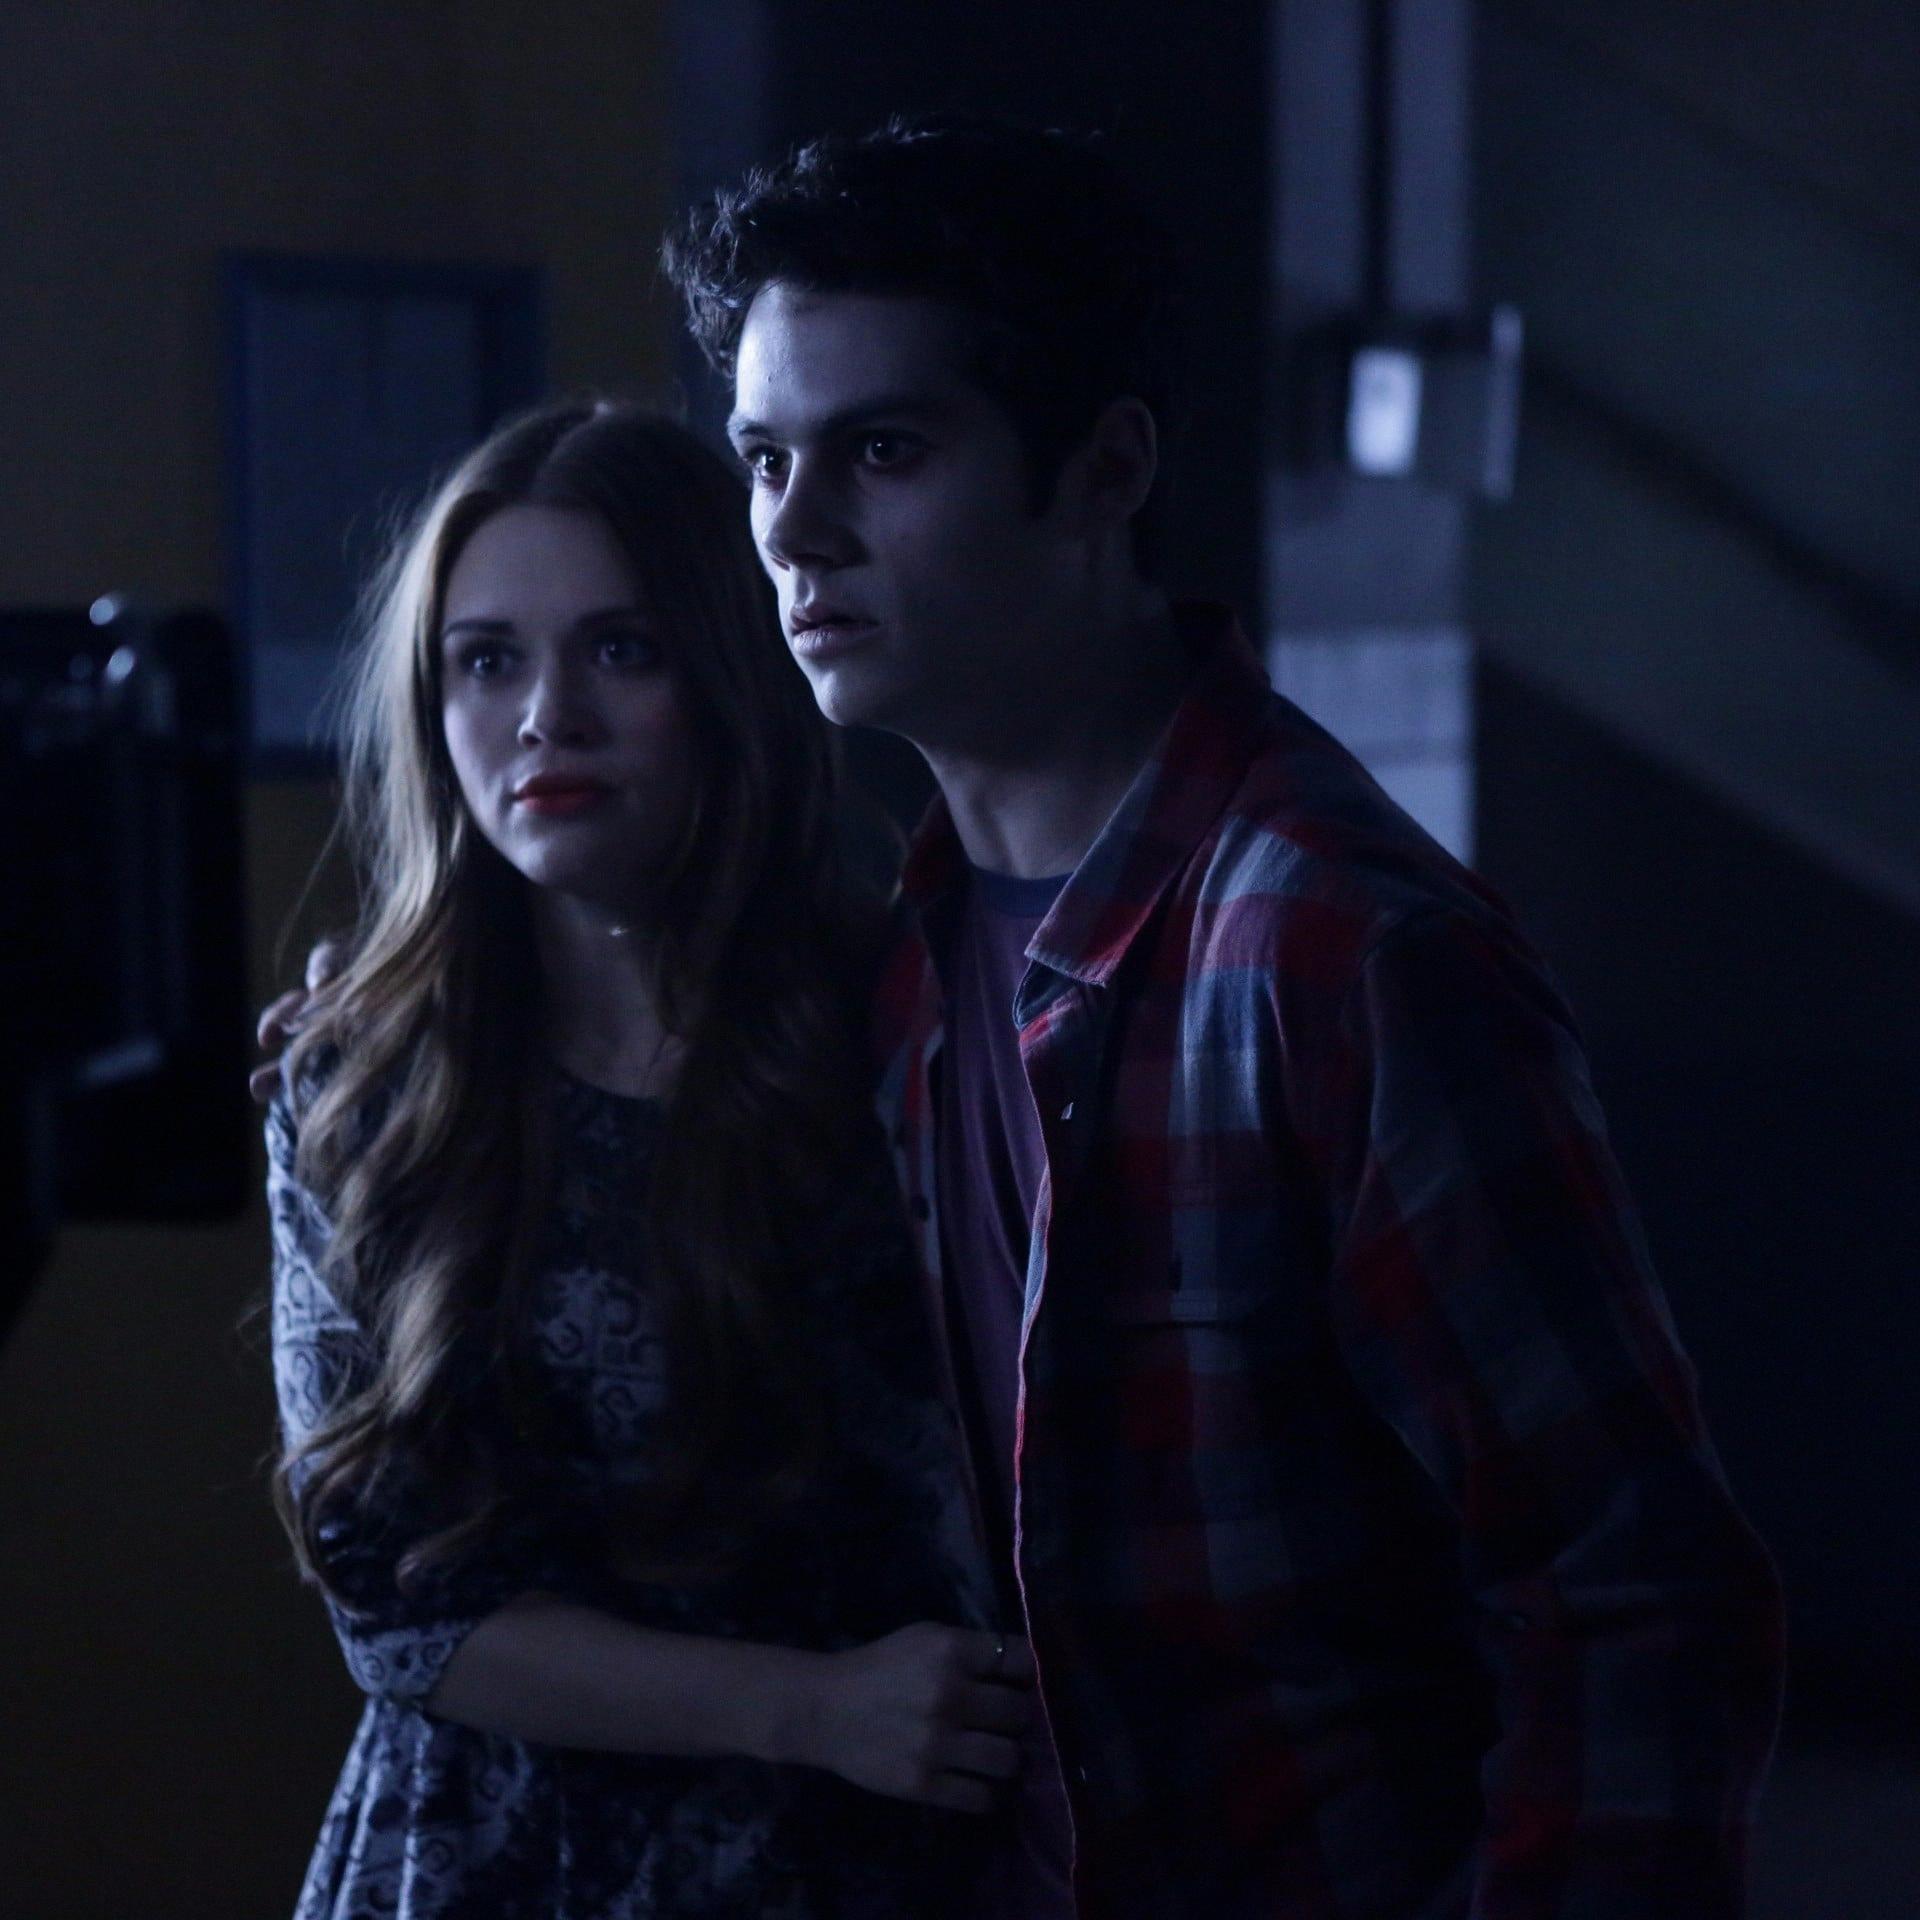 when do stiles and lydia get together